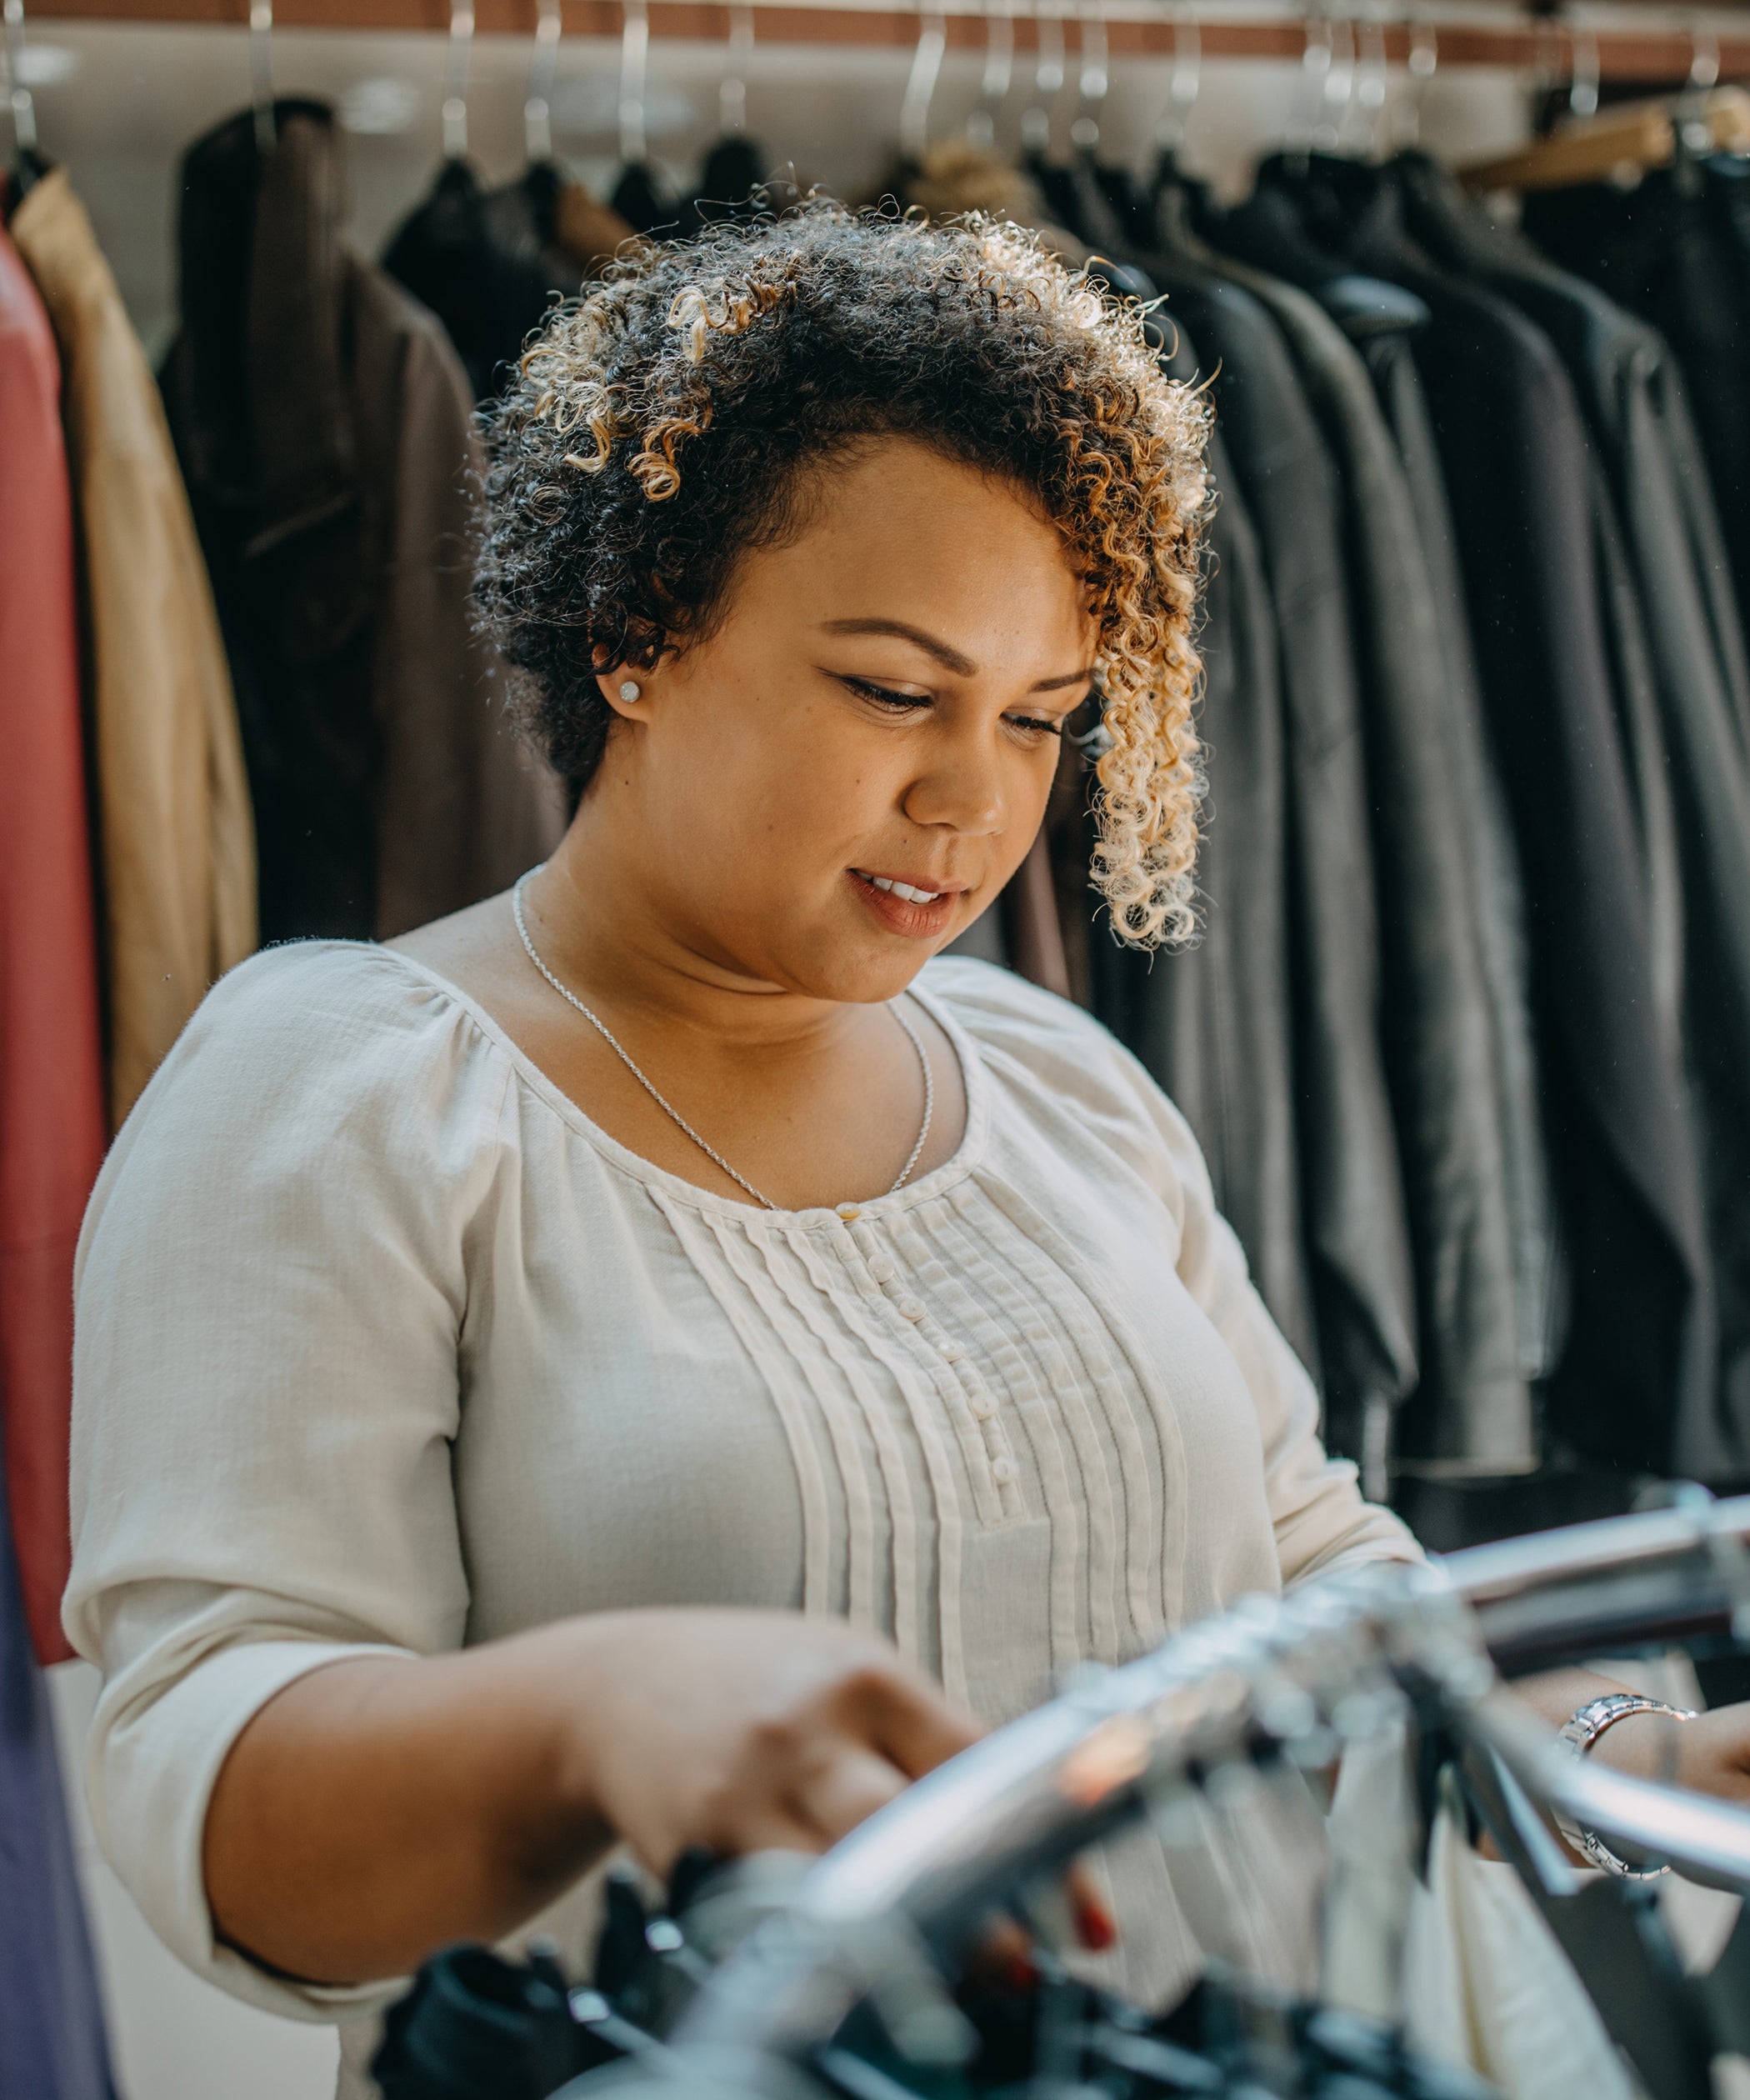 Why Is Shopping For Plus-Size Clothing So Hard?